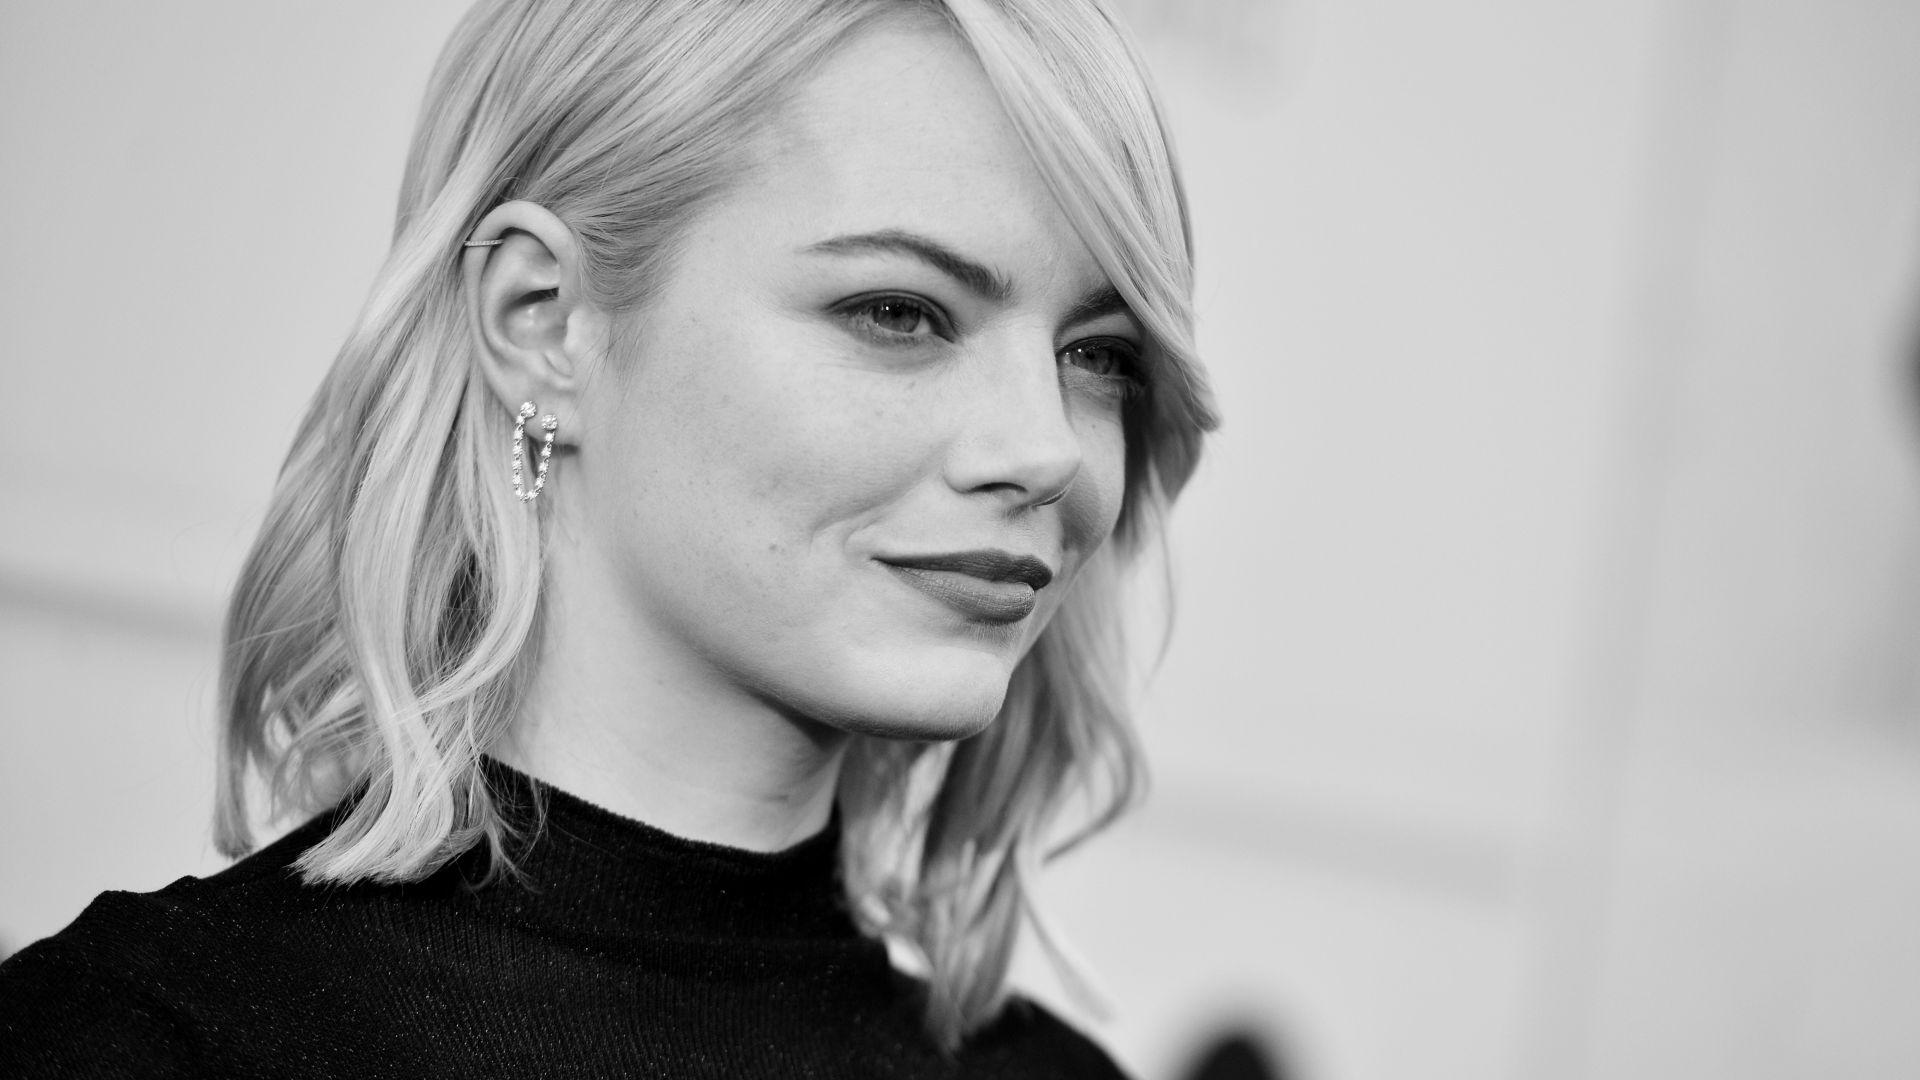 Emma Stone, Most Popular Celebs in 2015, actress (horizontal)